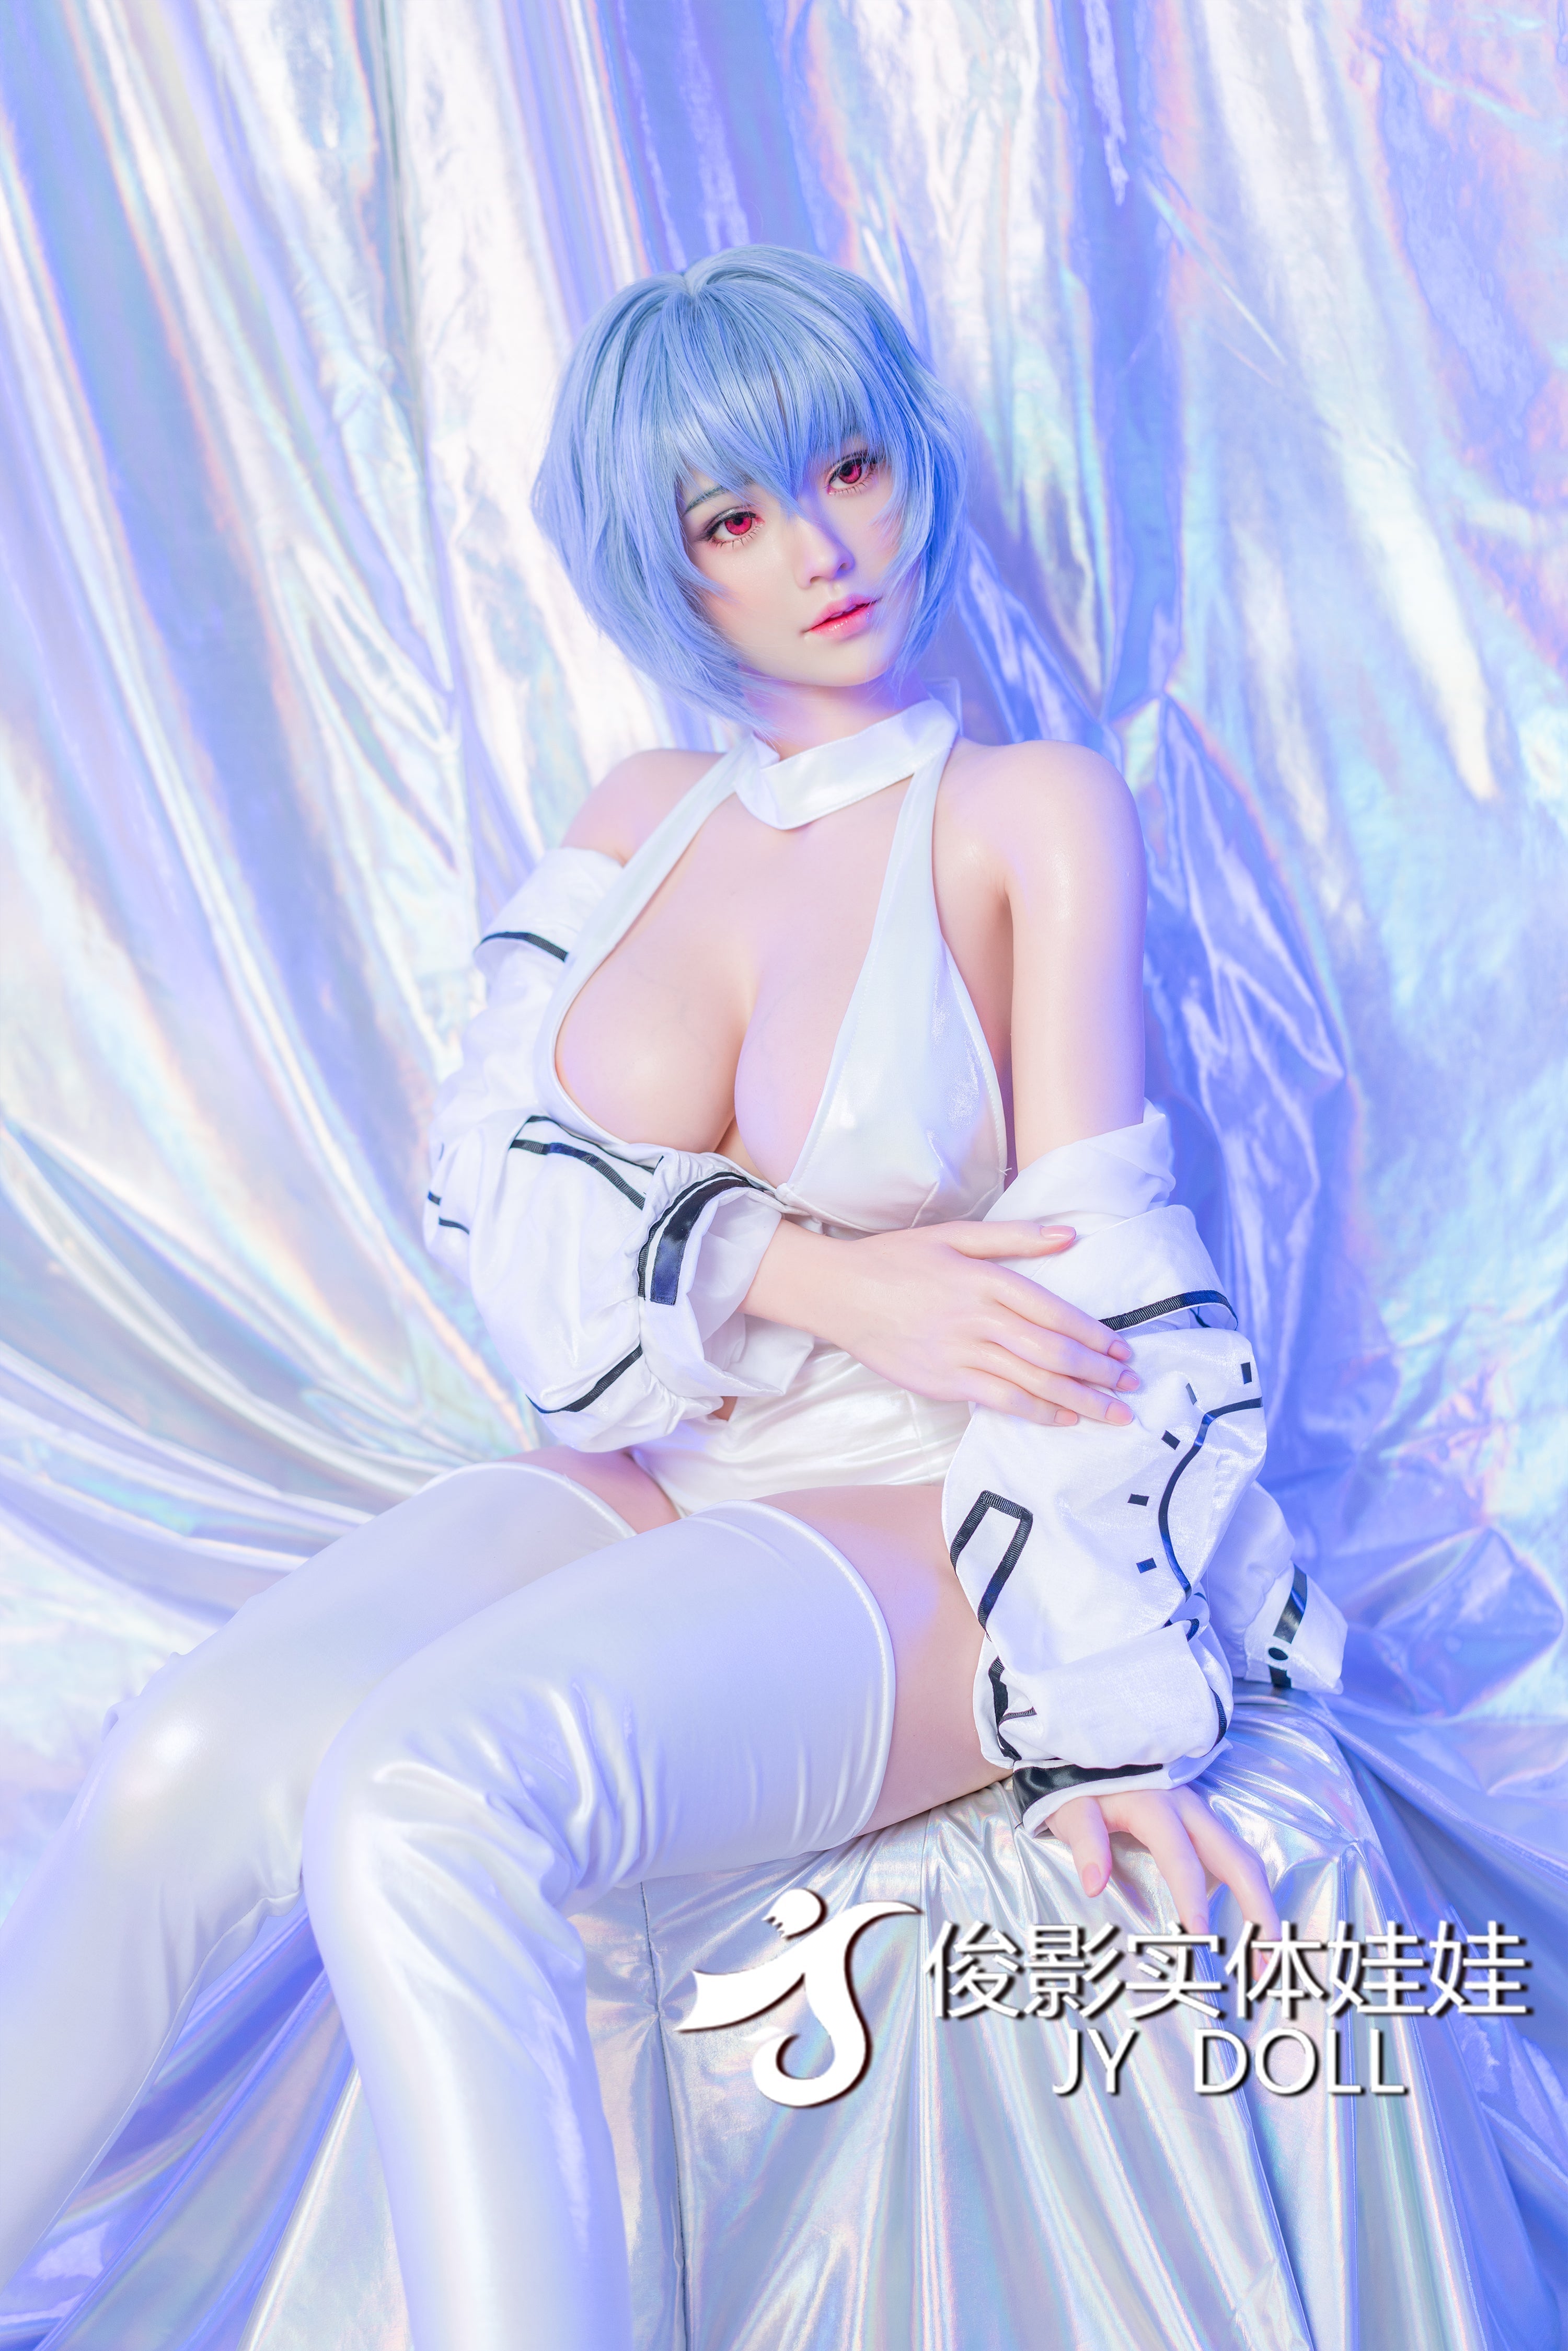 JY Doll 163 cm Silicone - Ayanami | Buy Sex Dolls at DOLLS ACTUALLY